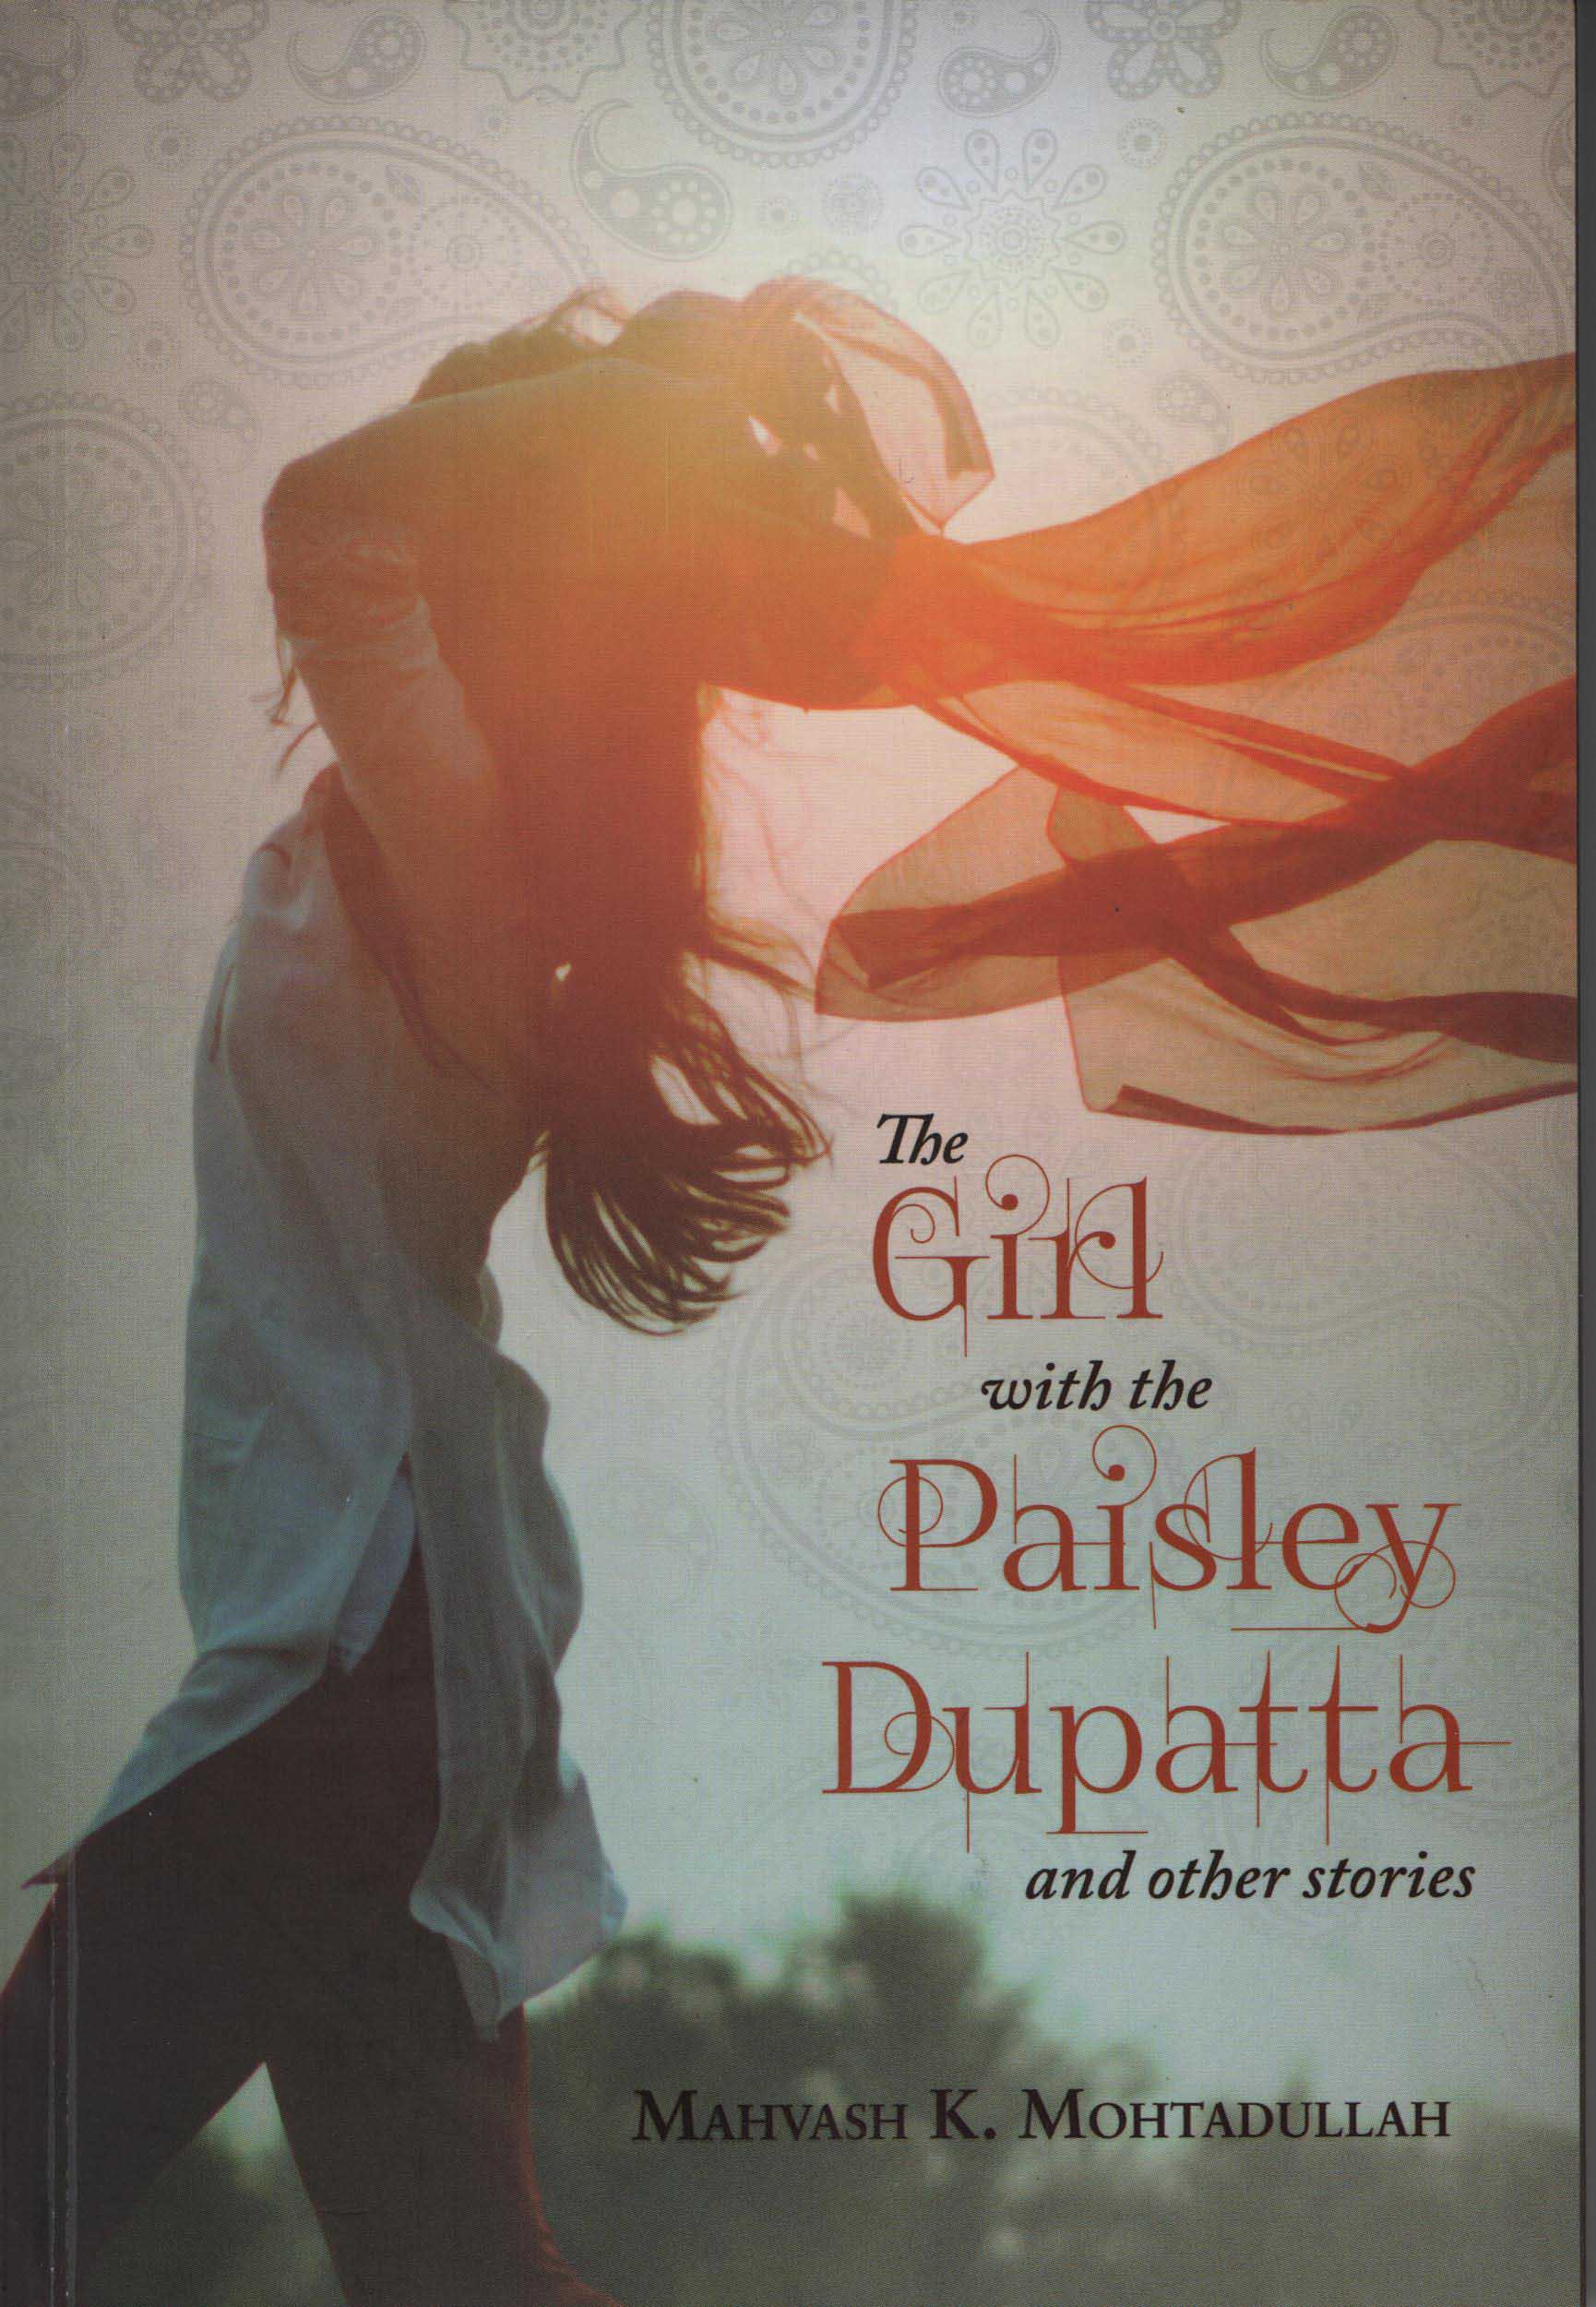 The Girl with the Paisley Dupatta